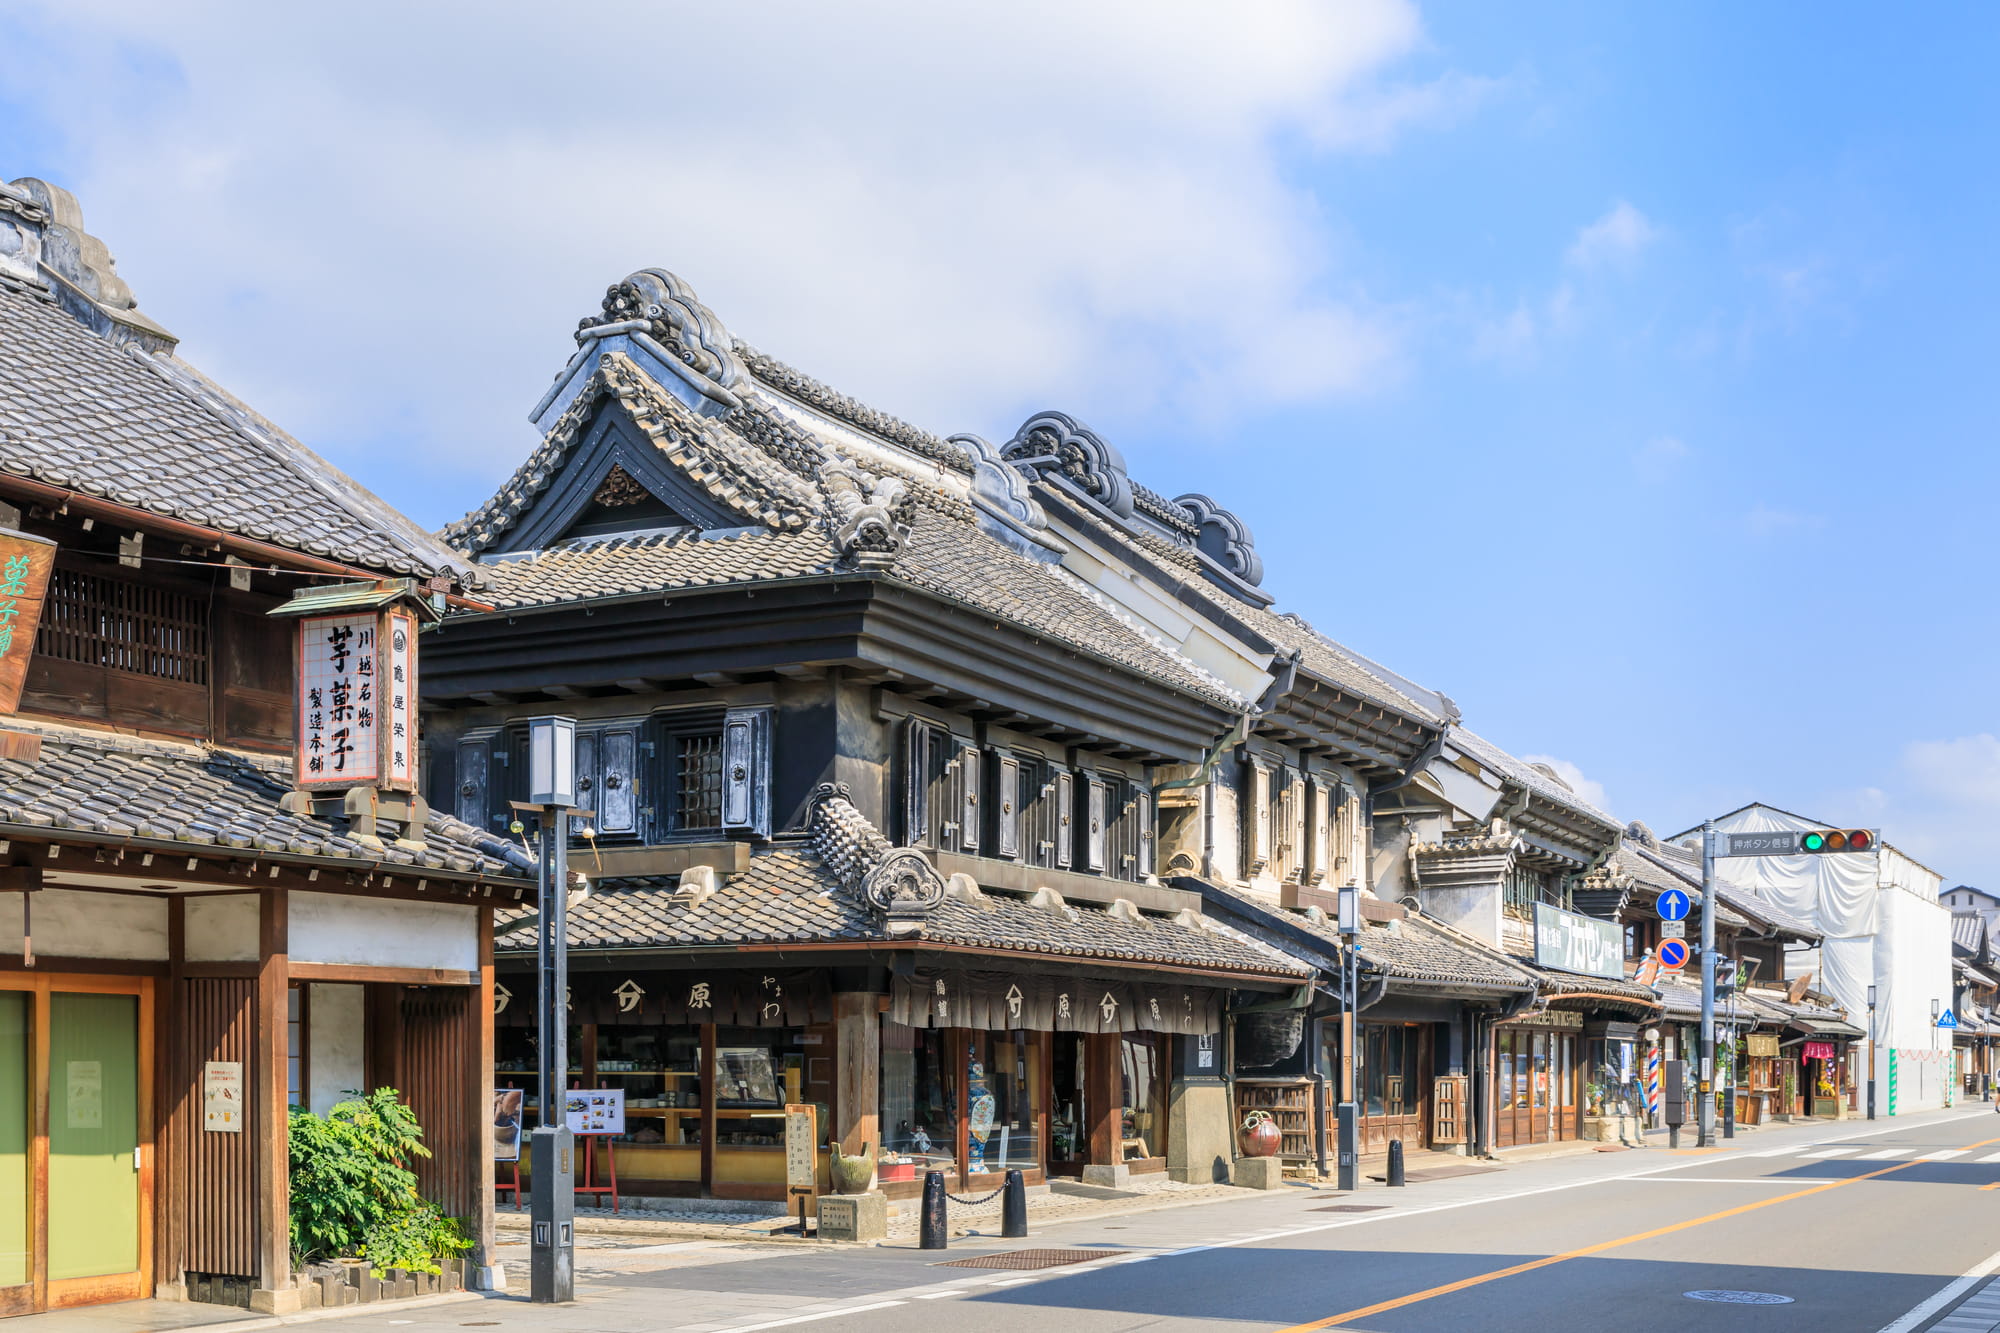 You don’t need a time machine to see the days of yore as the Saitama town of Kawagoe has incredibly preserved the past.